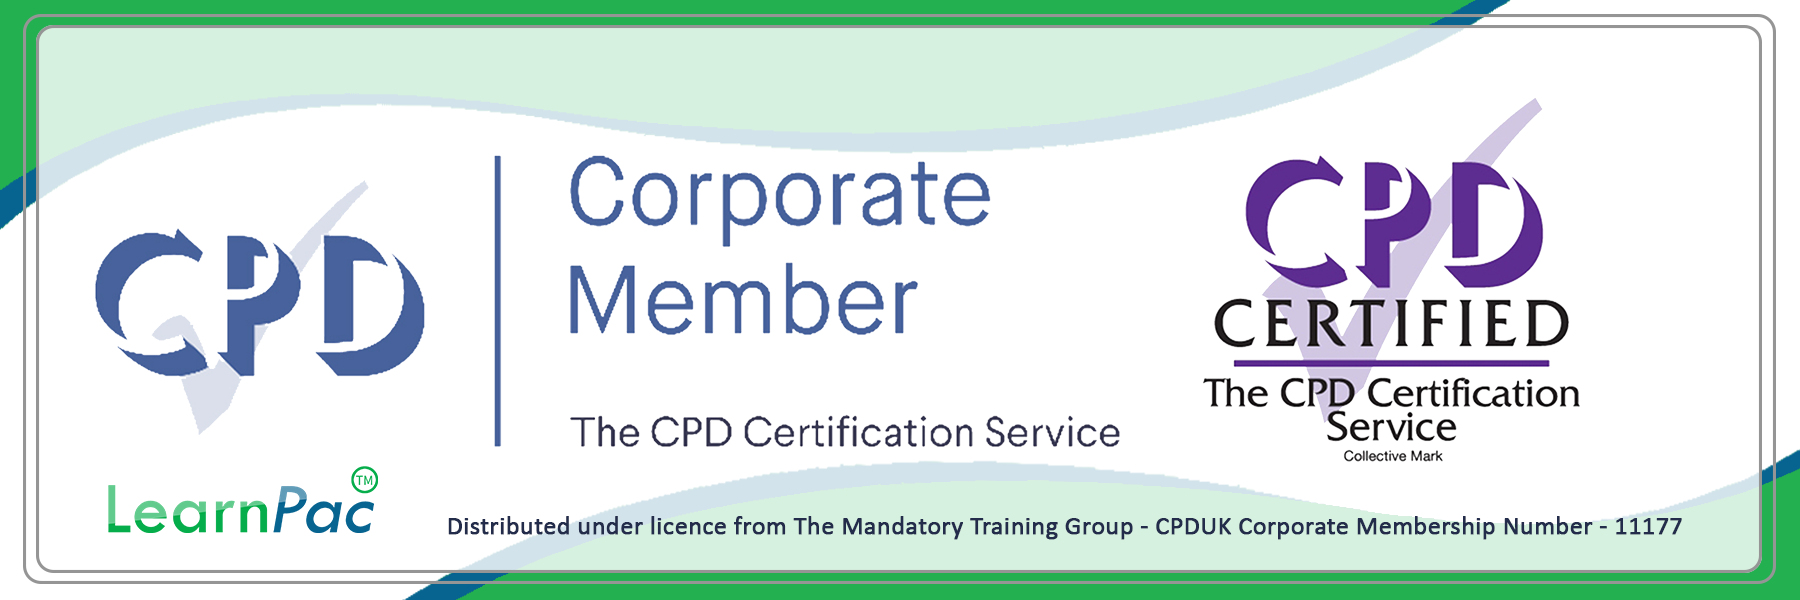 CSTF Non-Clinical Health and Safety - Online Training Course - CPDUK Certified - Learnpac System UK -